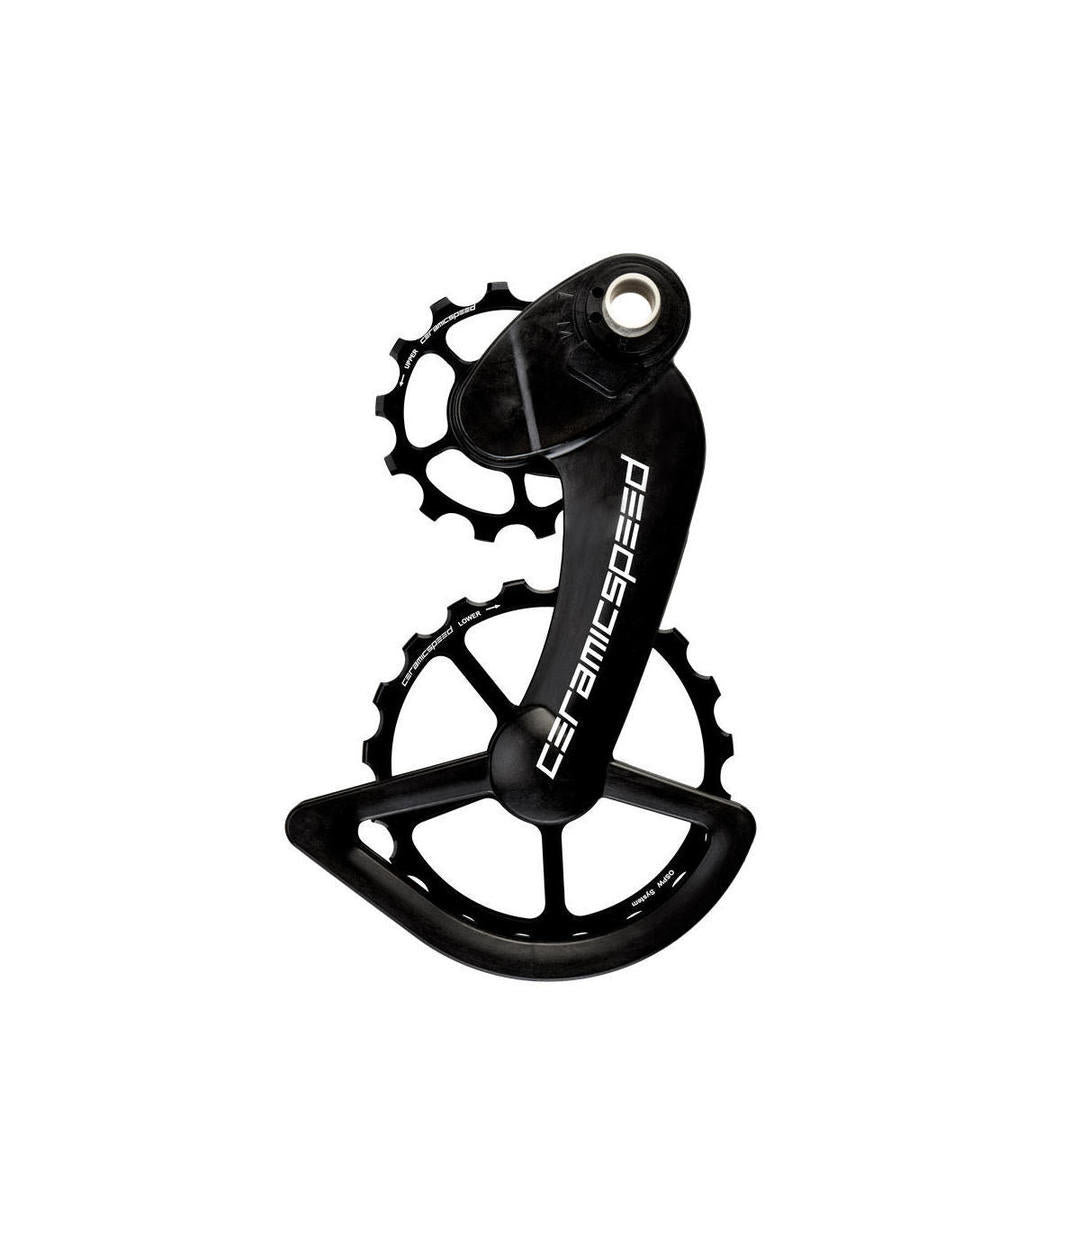 Ceramicspeed Oversized Pulley CAMPAGNOLO 12s. - Schwarz